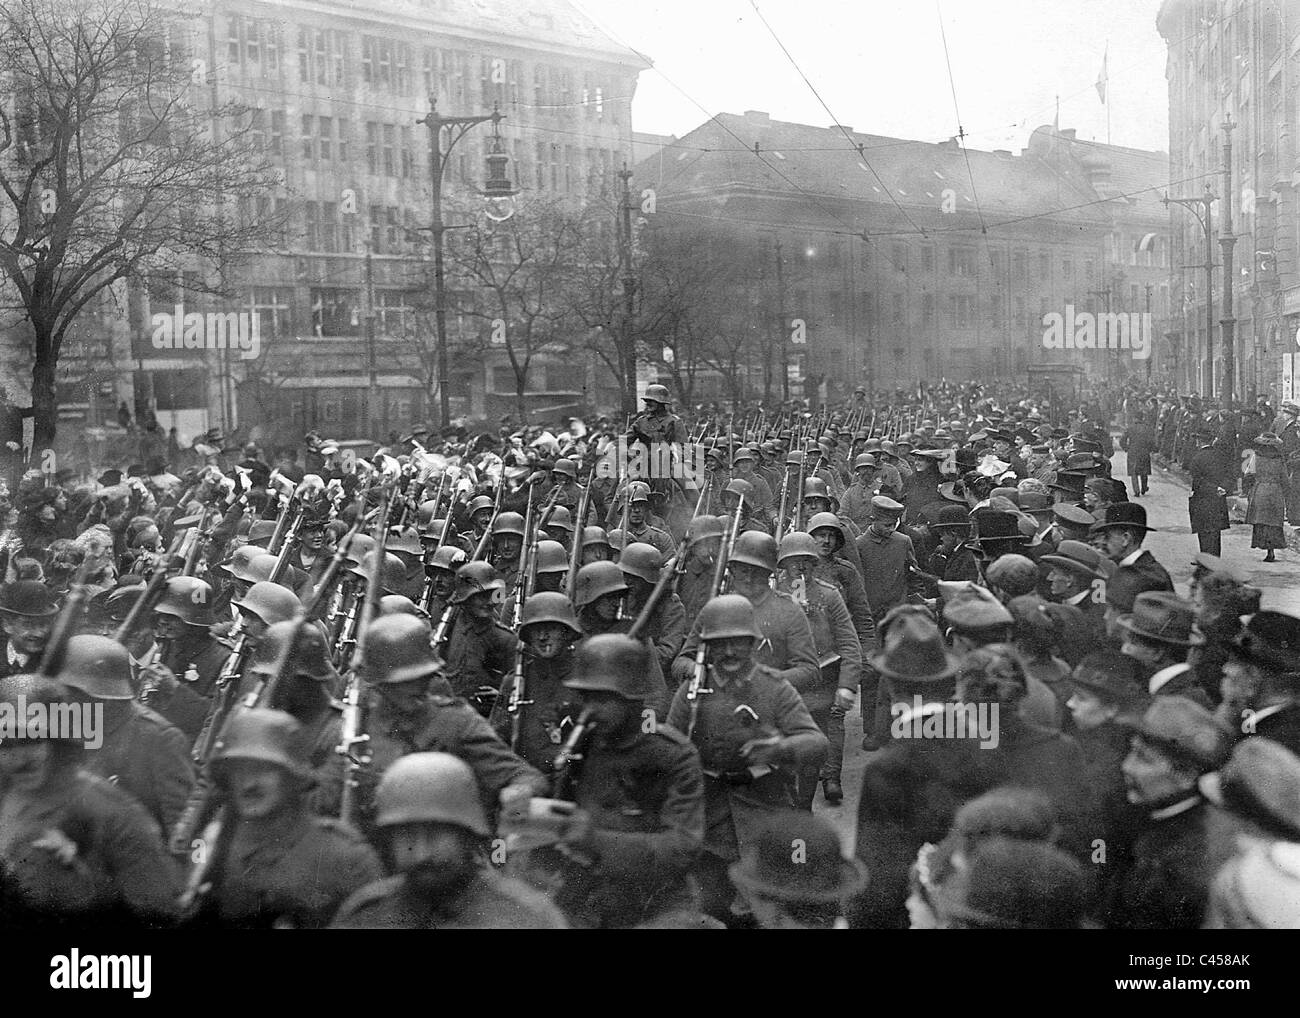 Troops return home after WWI, 1918 Stock Photo